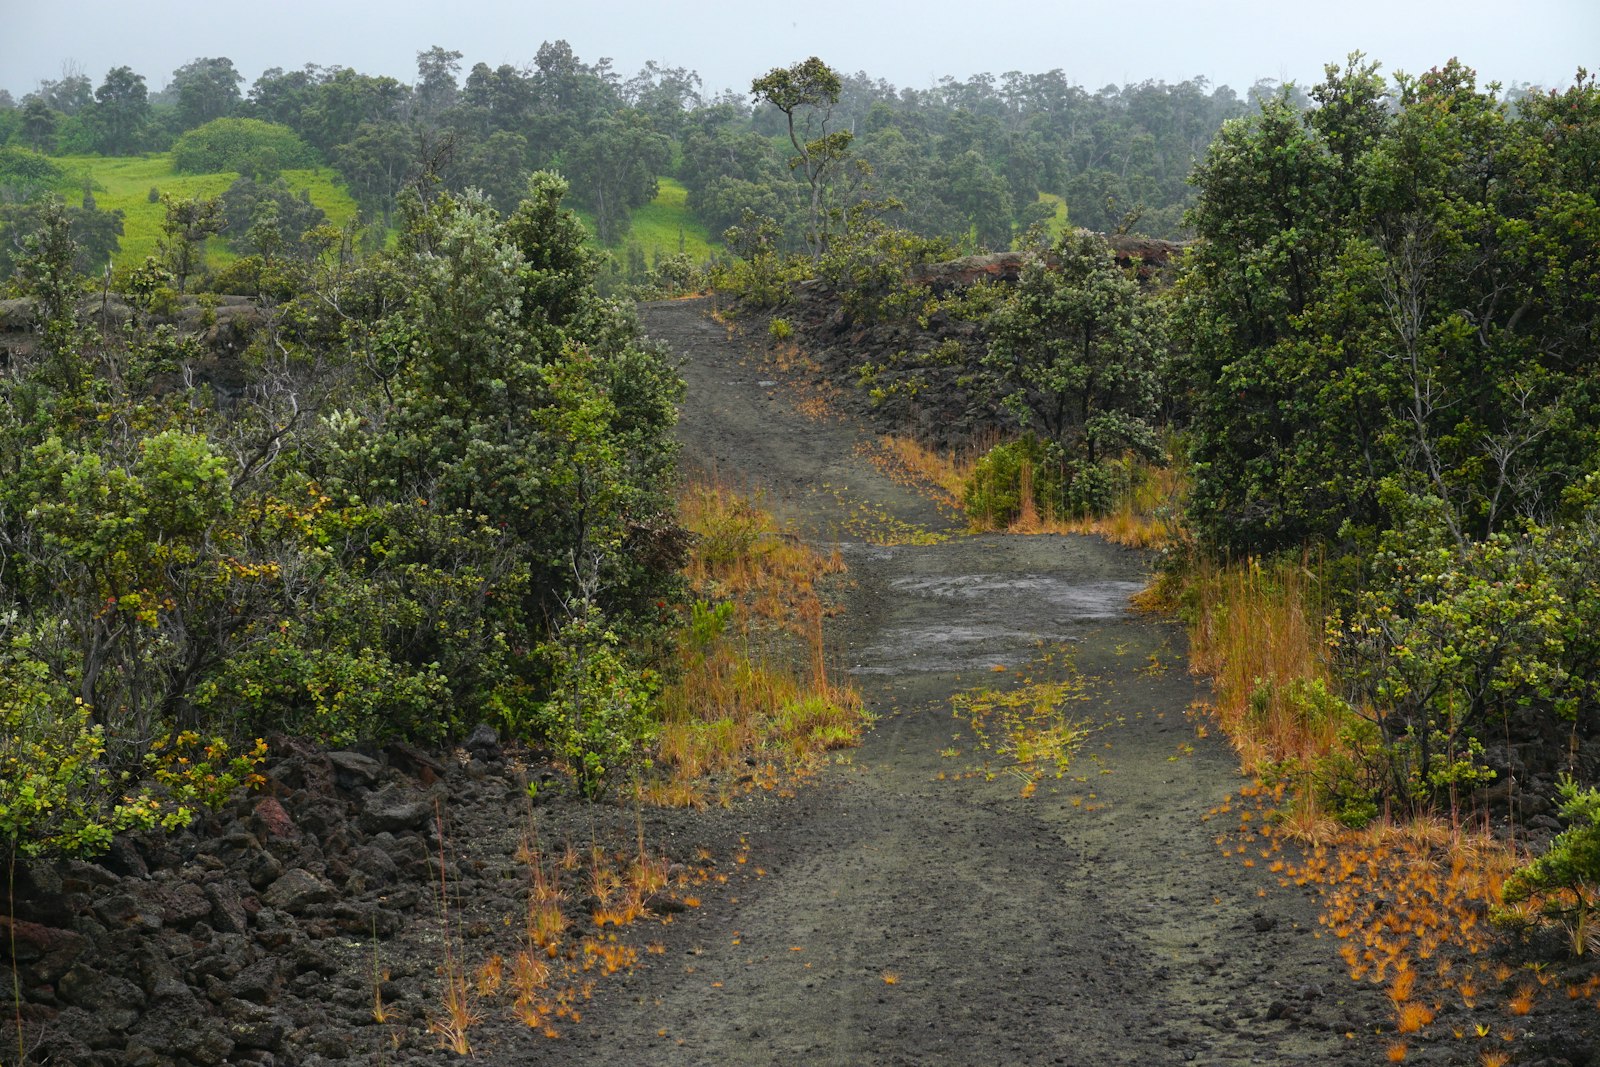 Wide, rocky trail through sparse forest in a lava field under overcast skies